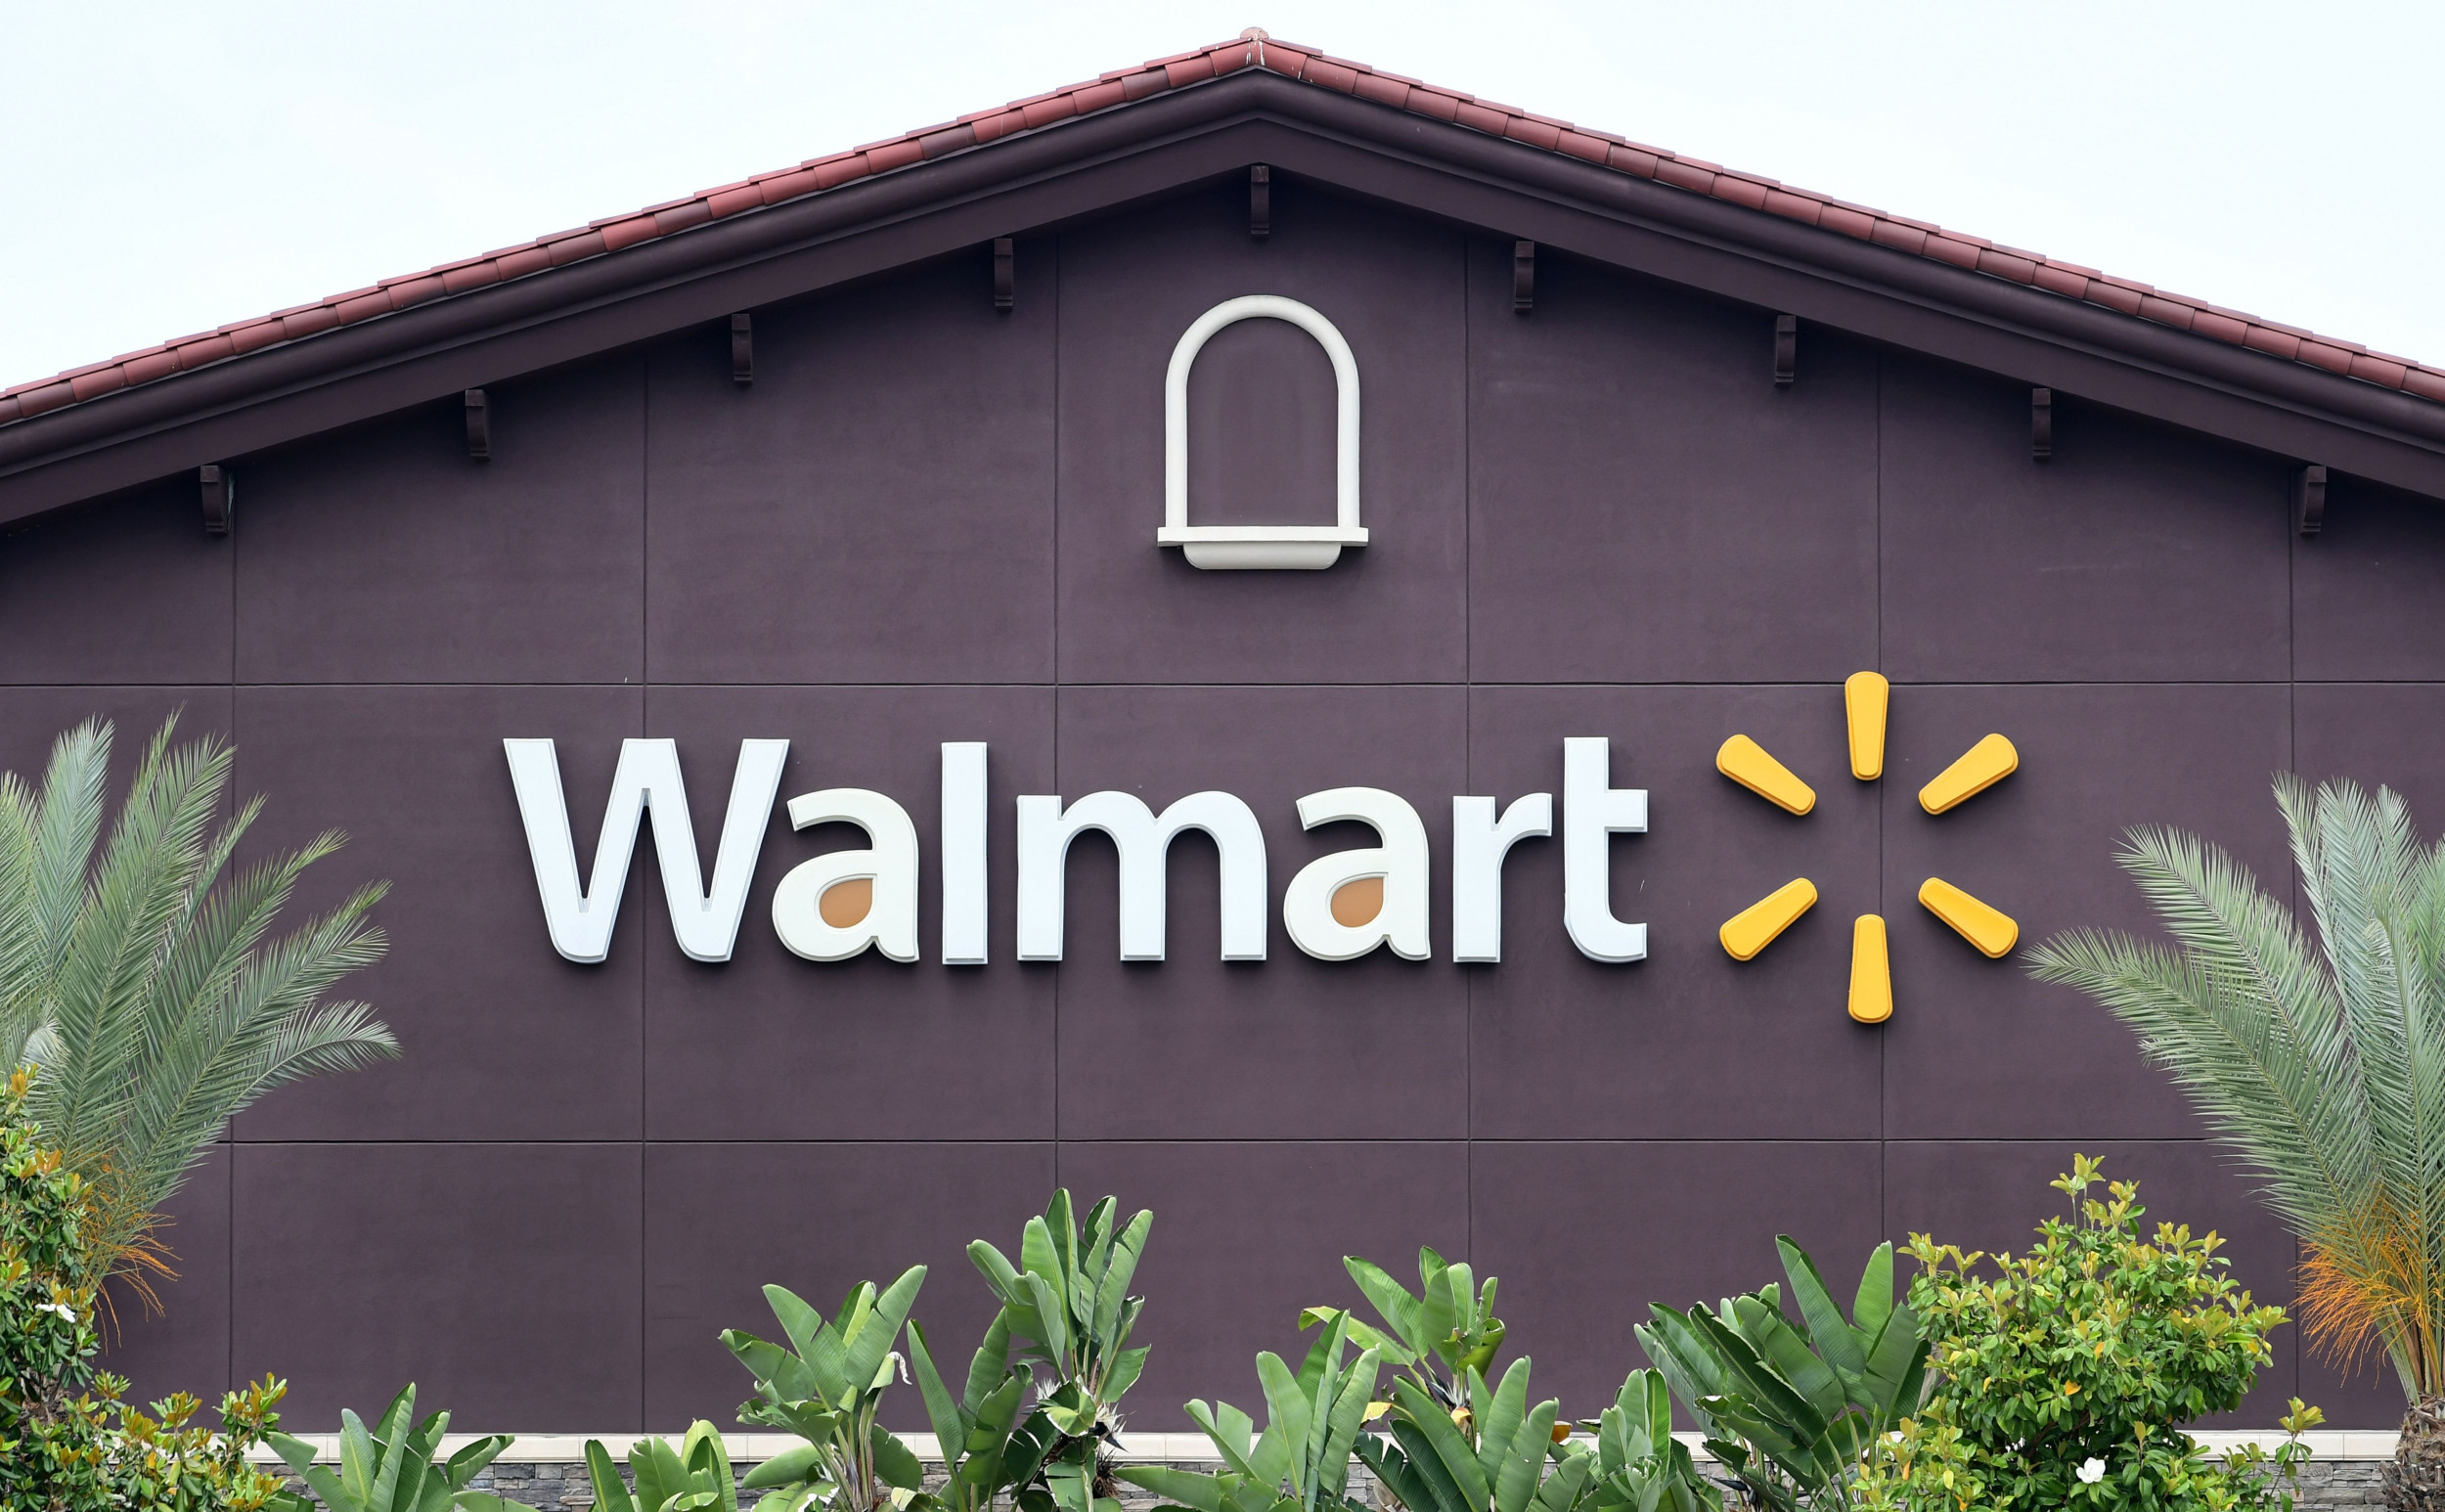 18 States' Walmart Stores Hit by Recall of Aromatherapy Spray Linked to